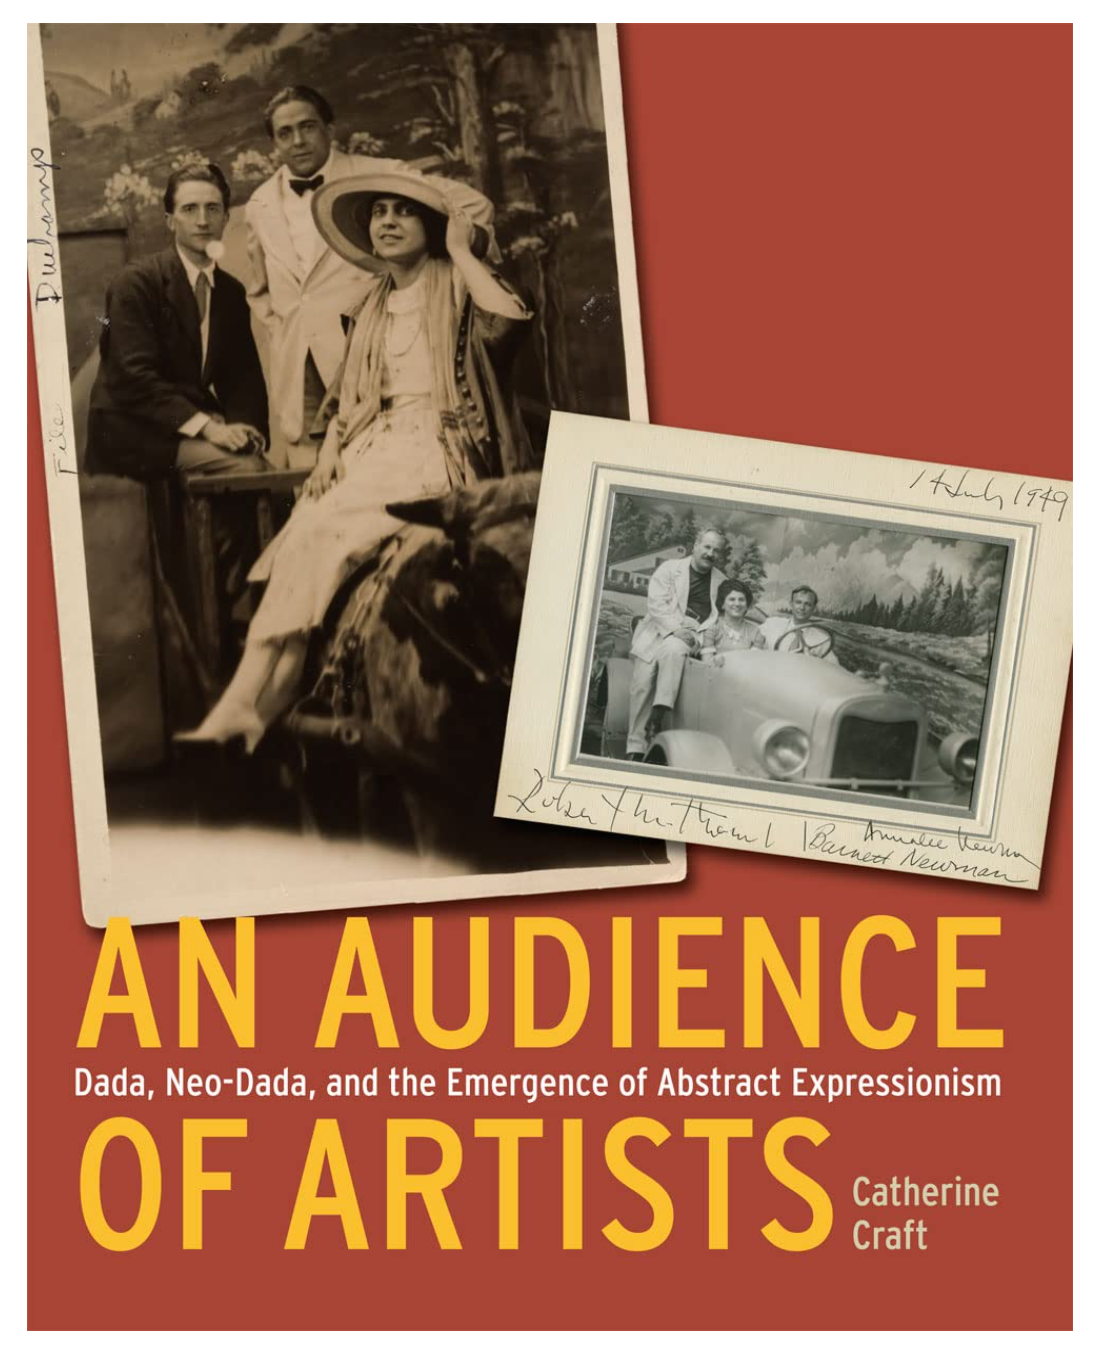 Hardback cover of “An Audience of Artists: Dada, Neo-Dada, and the Emergence of Abstract Expressionism” 